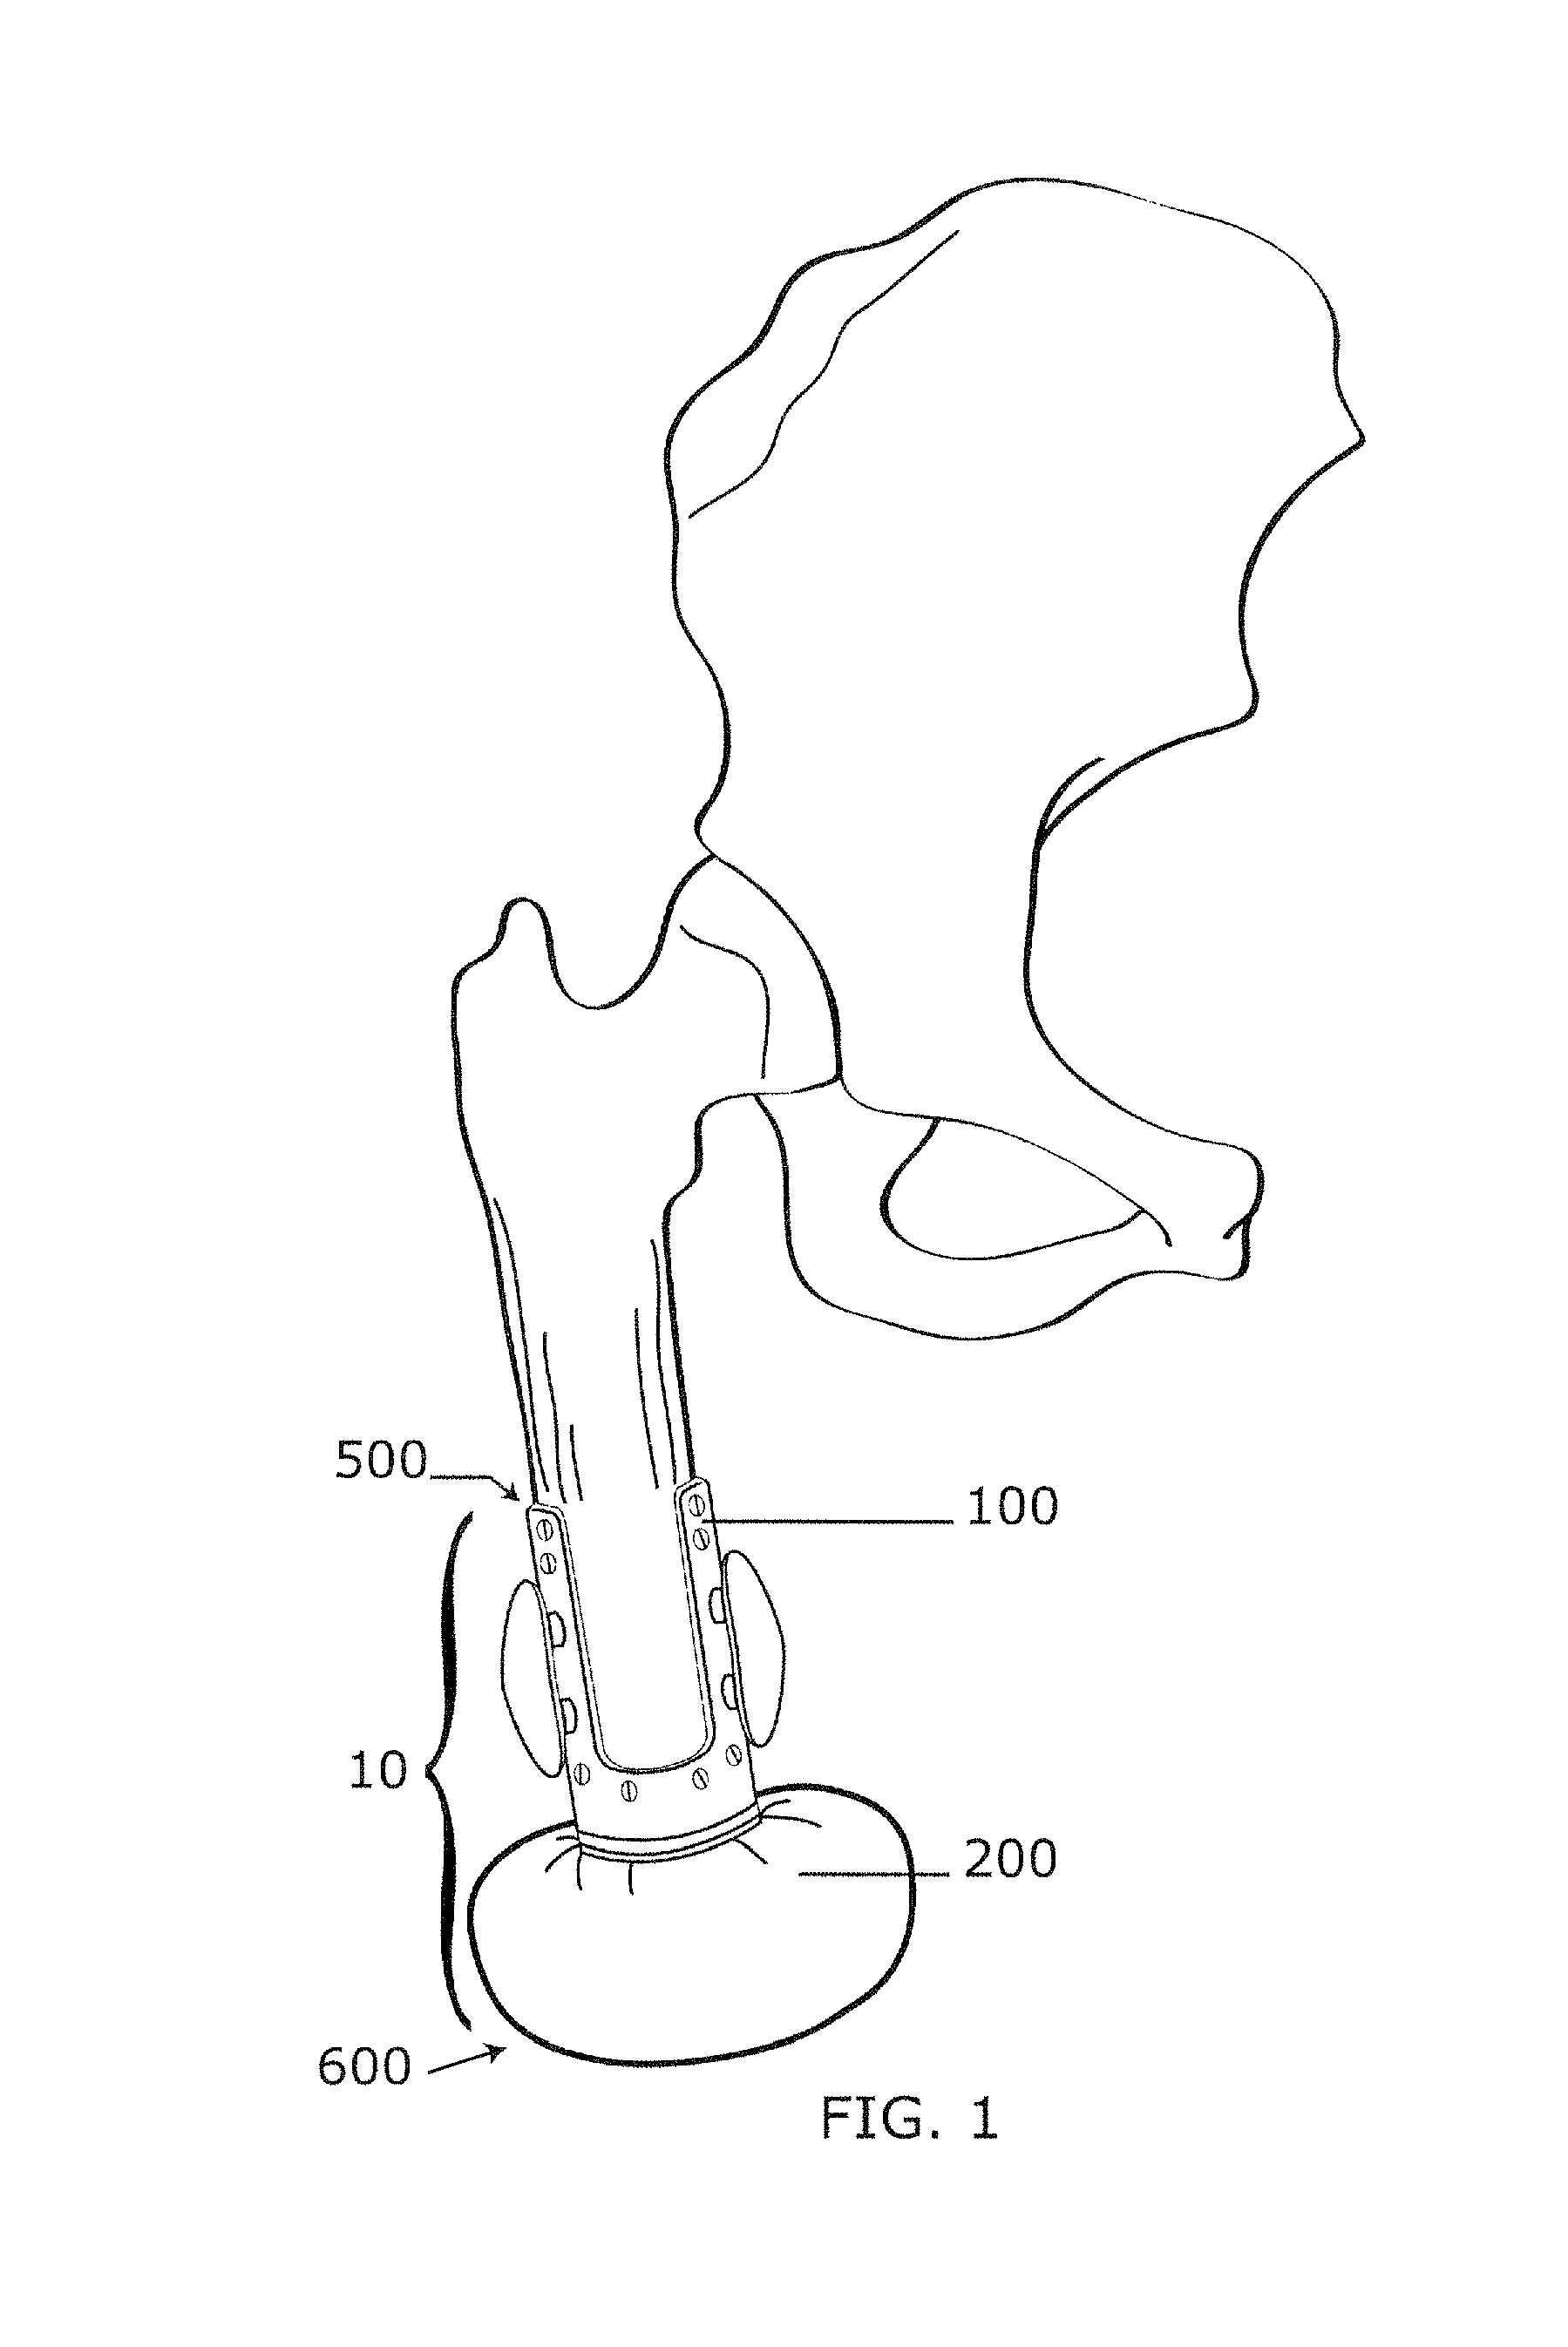 Implantable prosthetic device for distribution of weight on amputated limb and method of use with an external prosthetic device